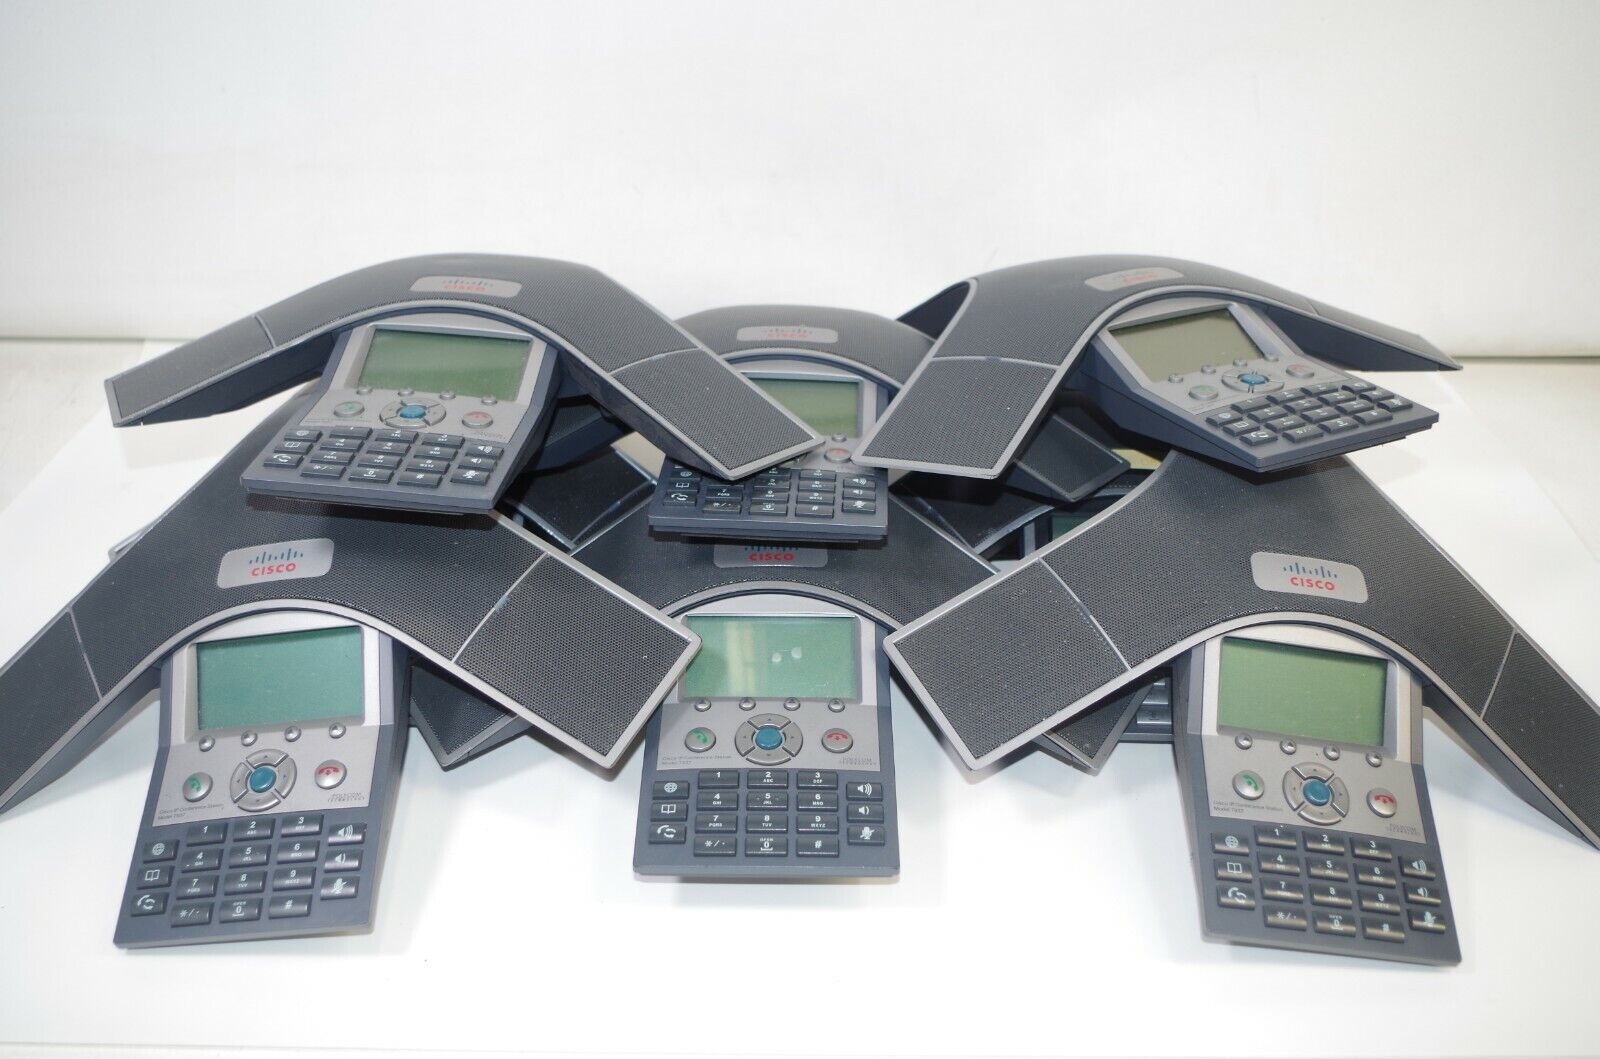 Lot of 6 Cisco VoIP Conference Station Phones CP-7937G 2201-40100-001